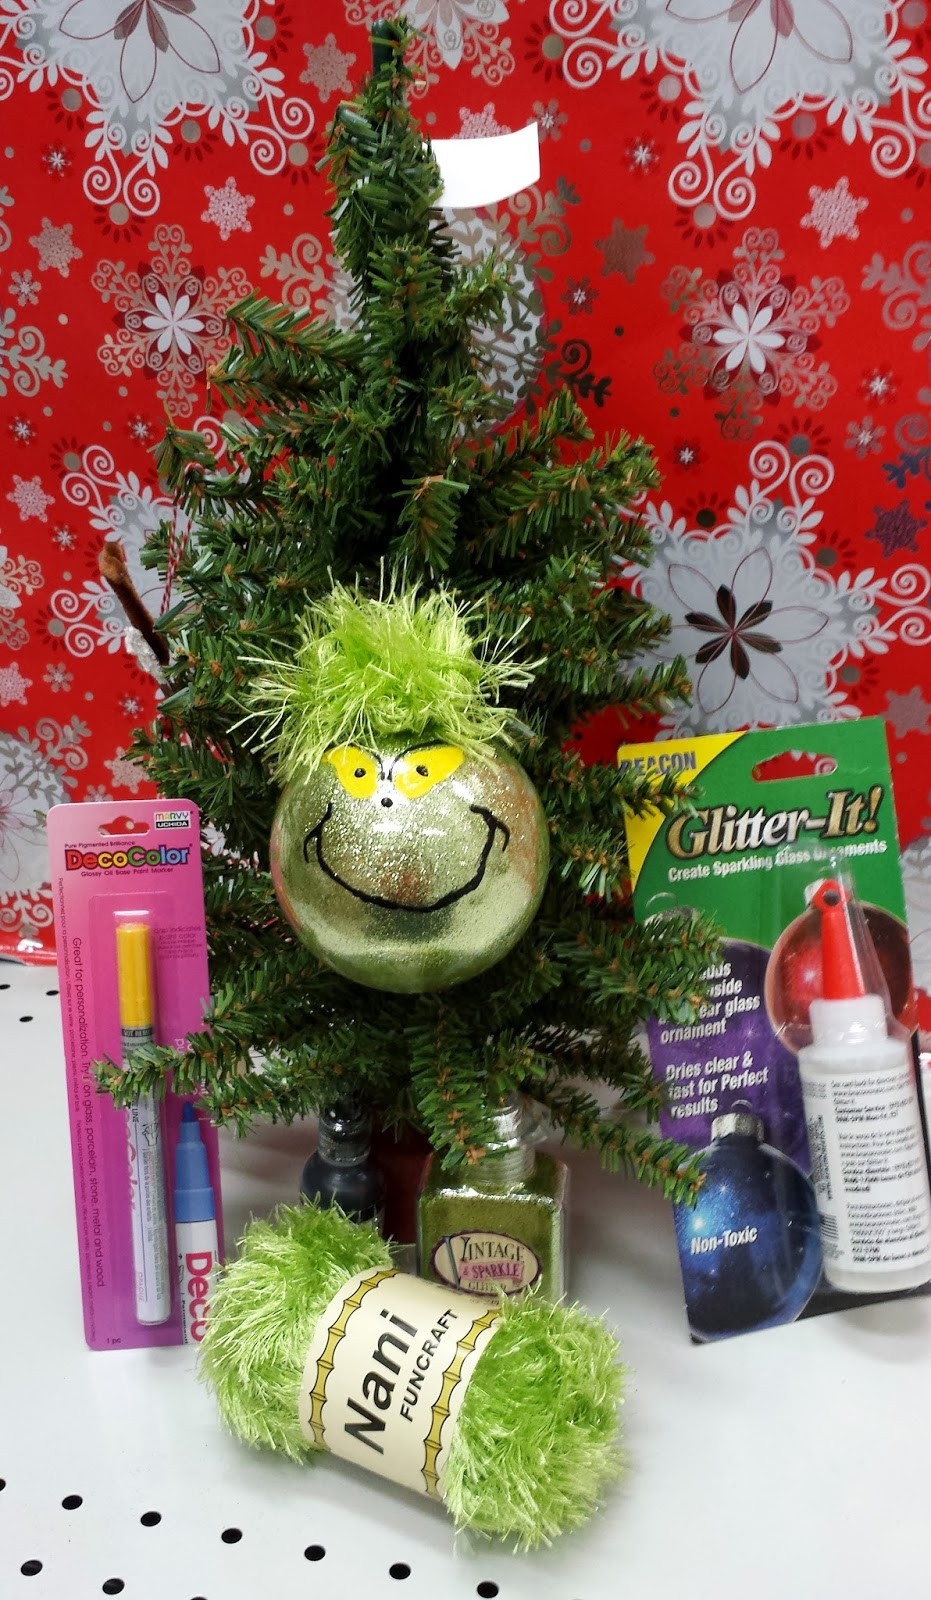 DIY Grinch Christmas Decorations
 25 Awesome Grinch Christmas Decorations Ideas Decoration